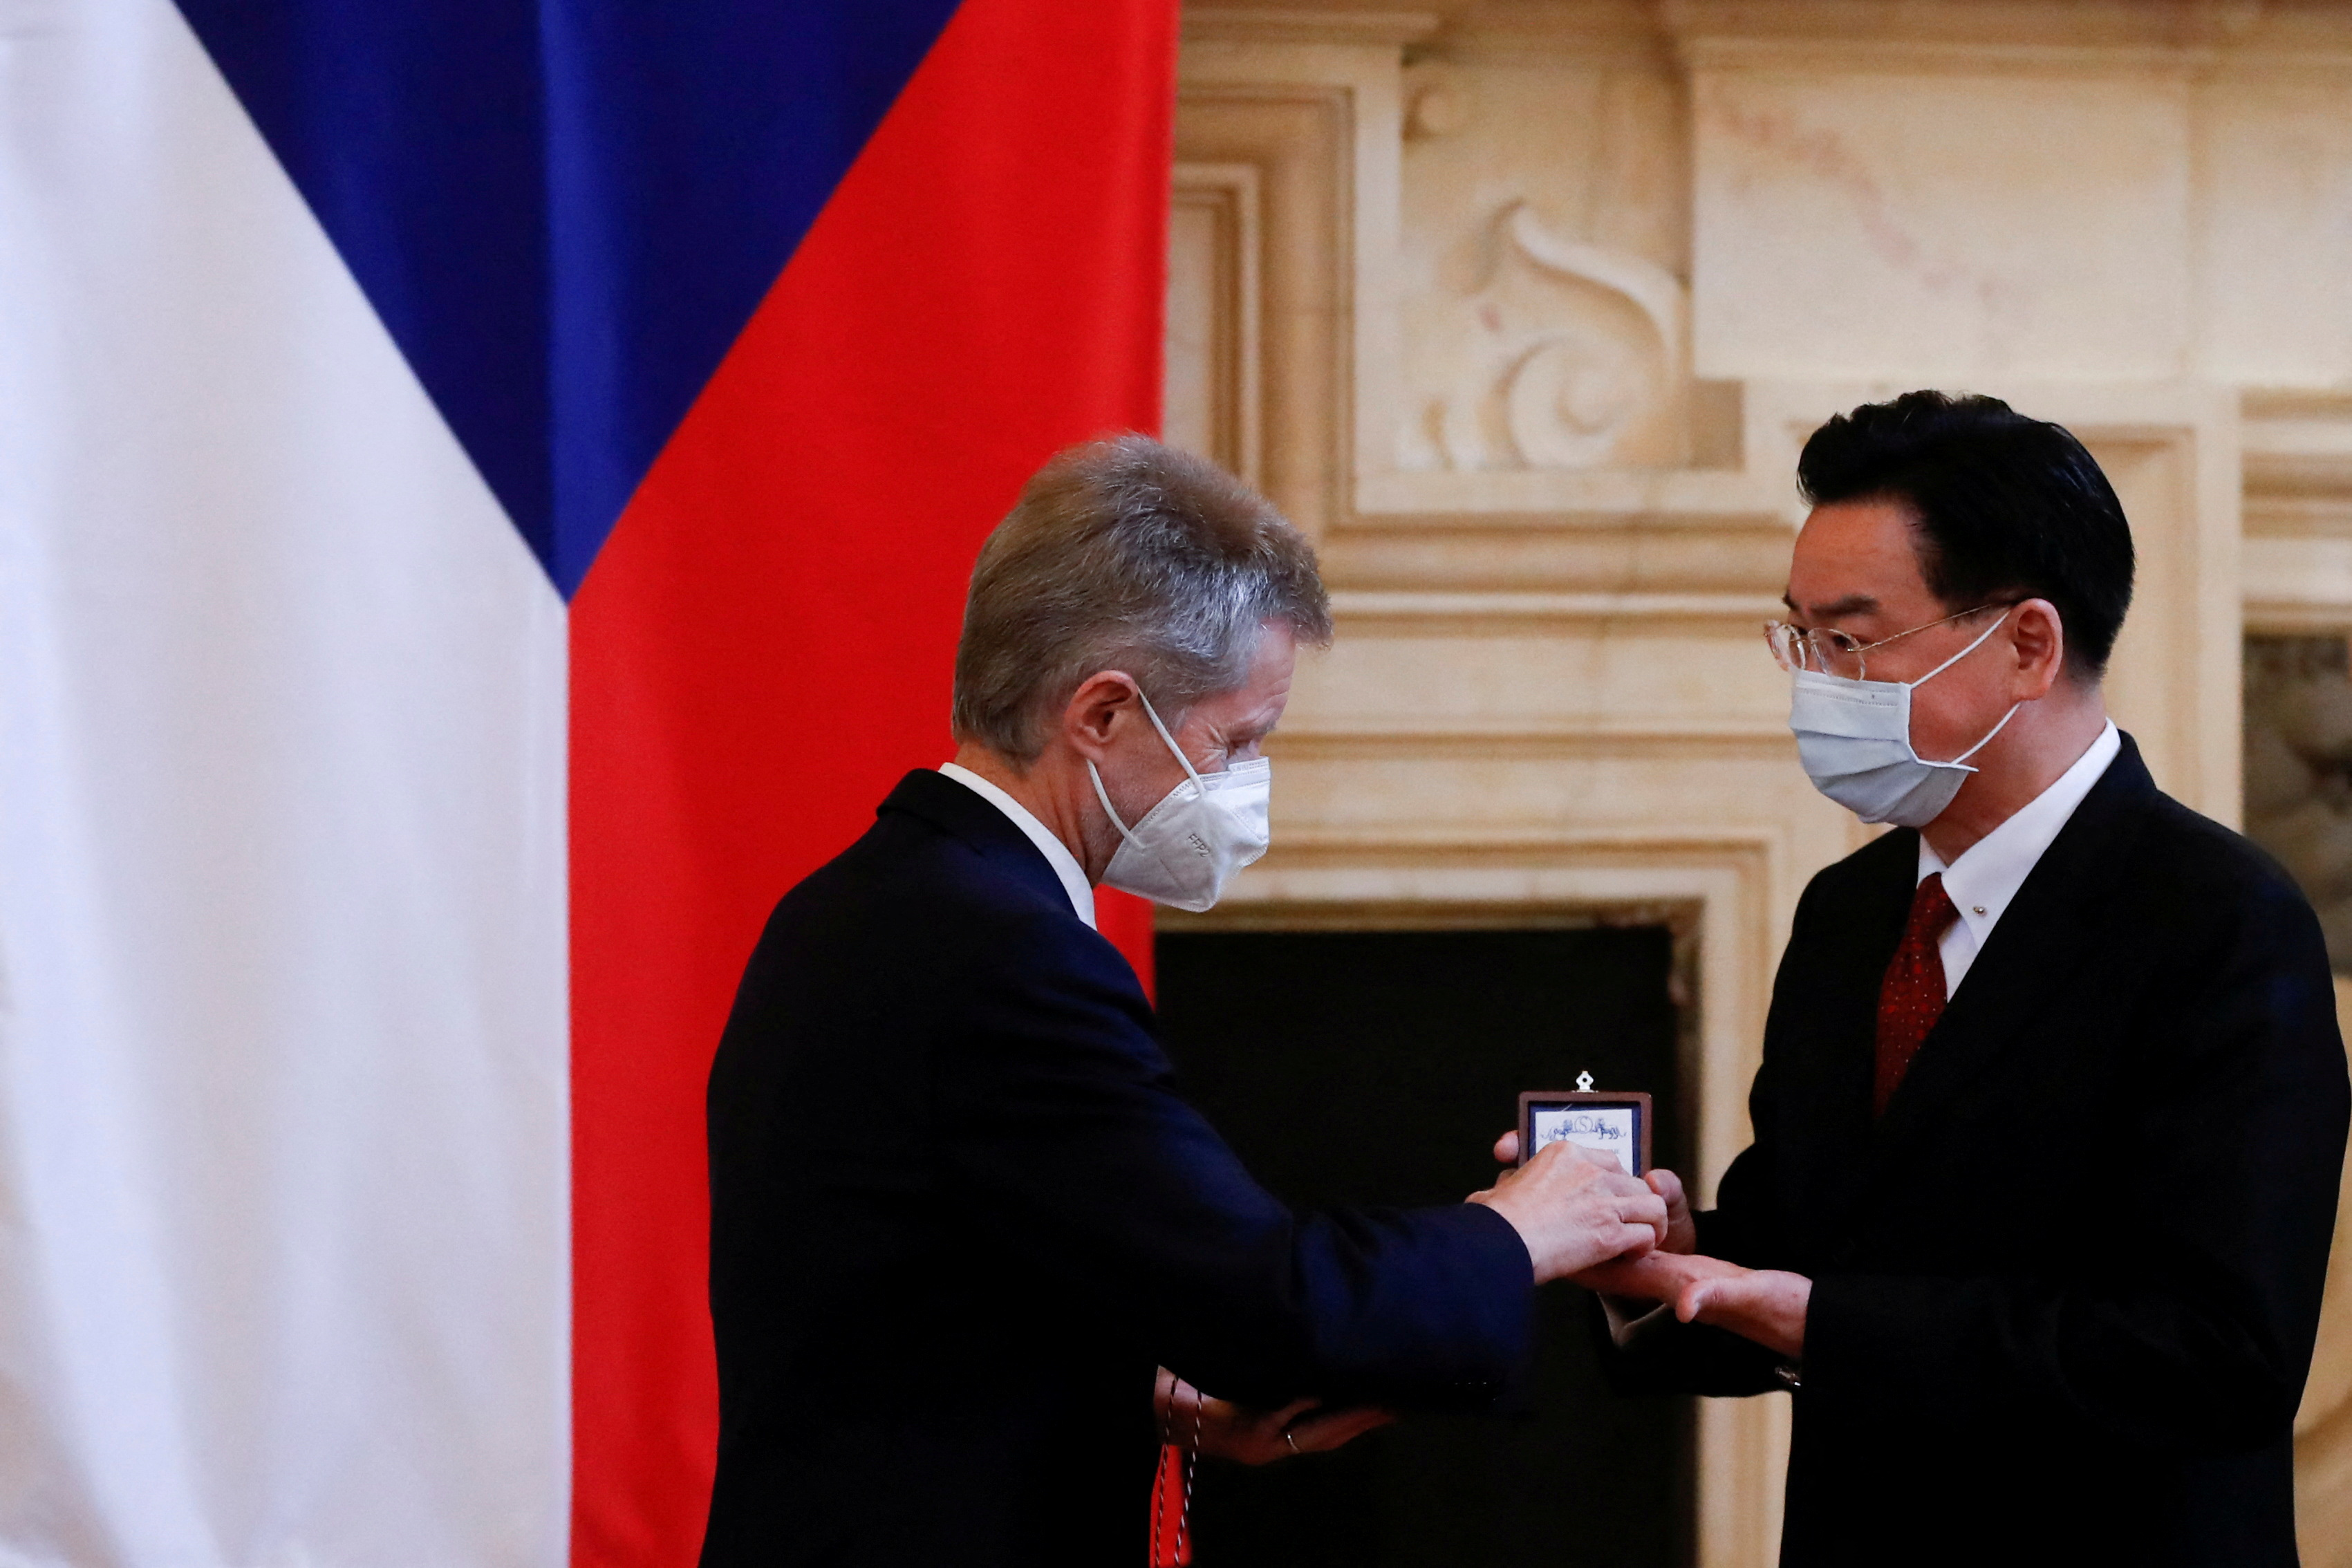 Czech Senate Vystrcil welcomes Taiwan Foreign Minister Wu in Prague